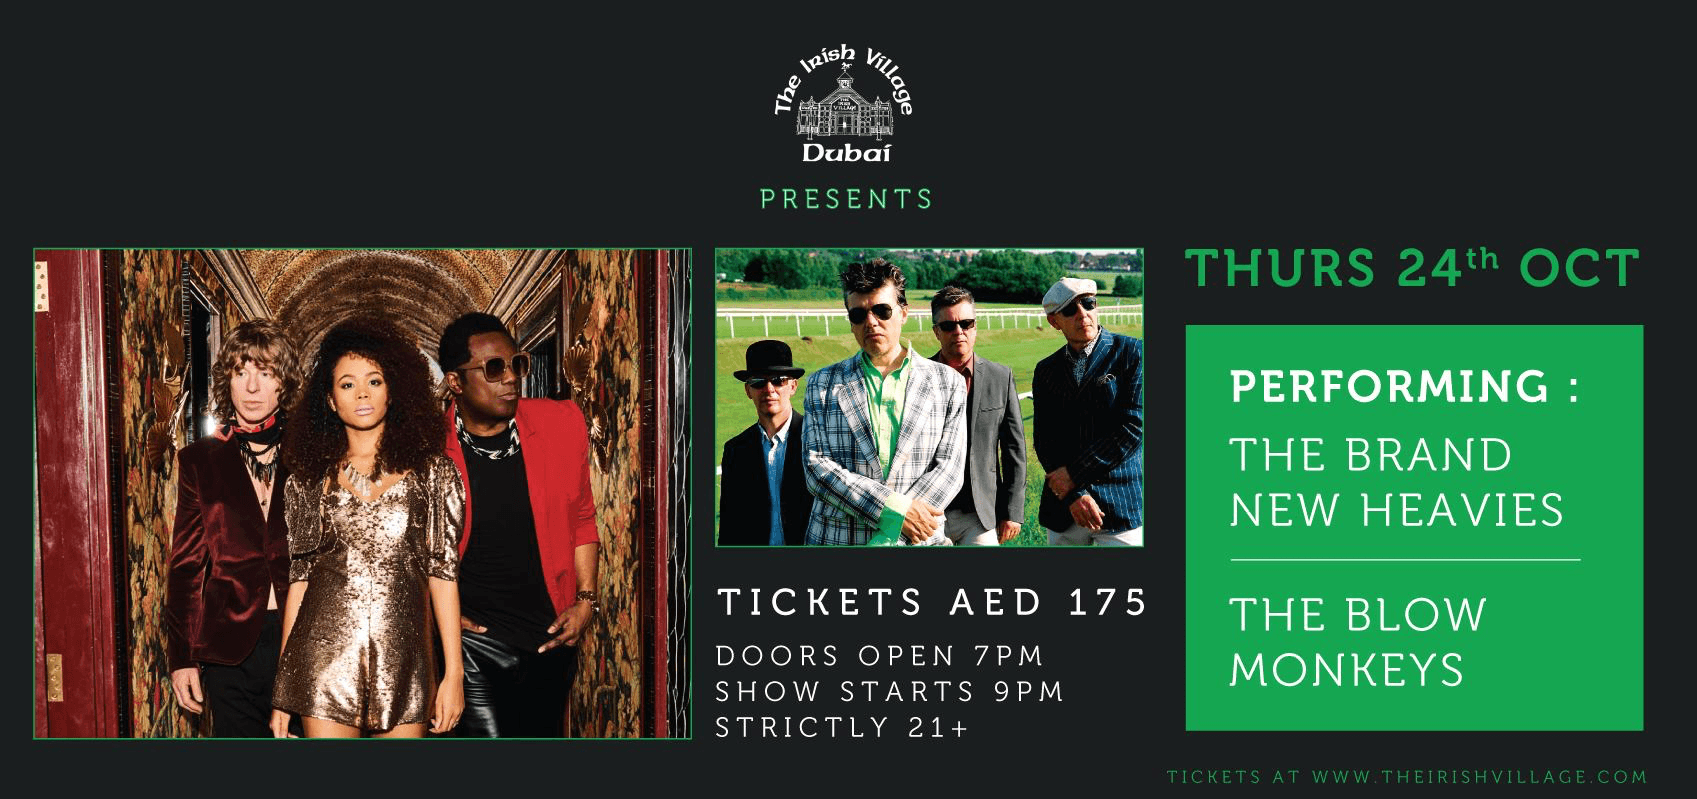 The Brand New Heavies and The Blow Monkeys at The Irish Village - Coming Soon in UAE